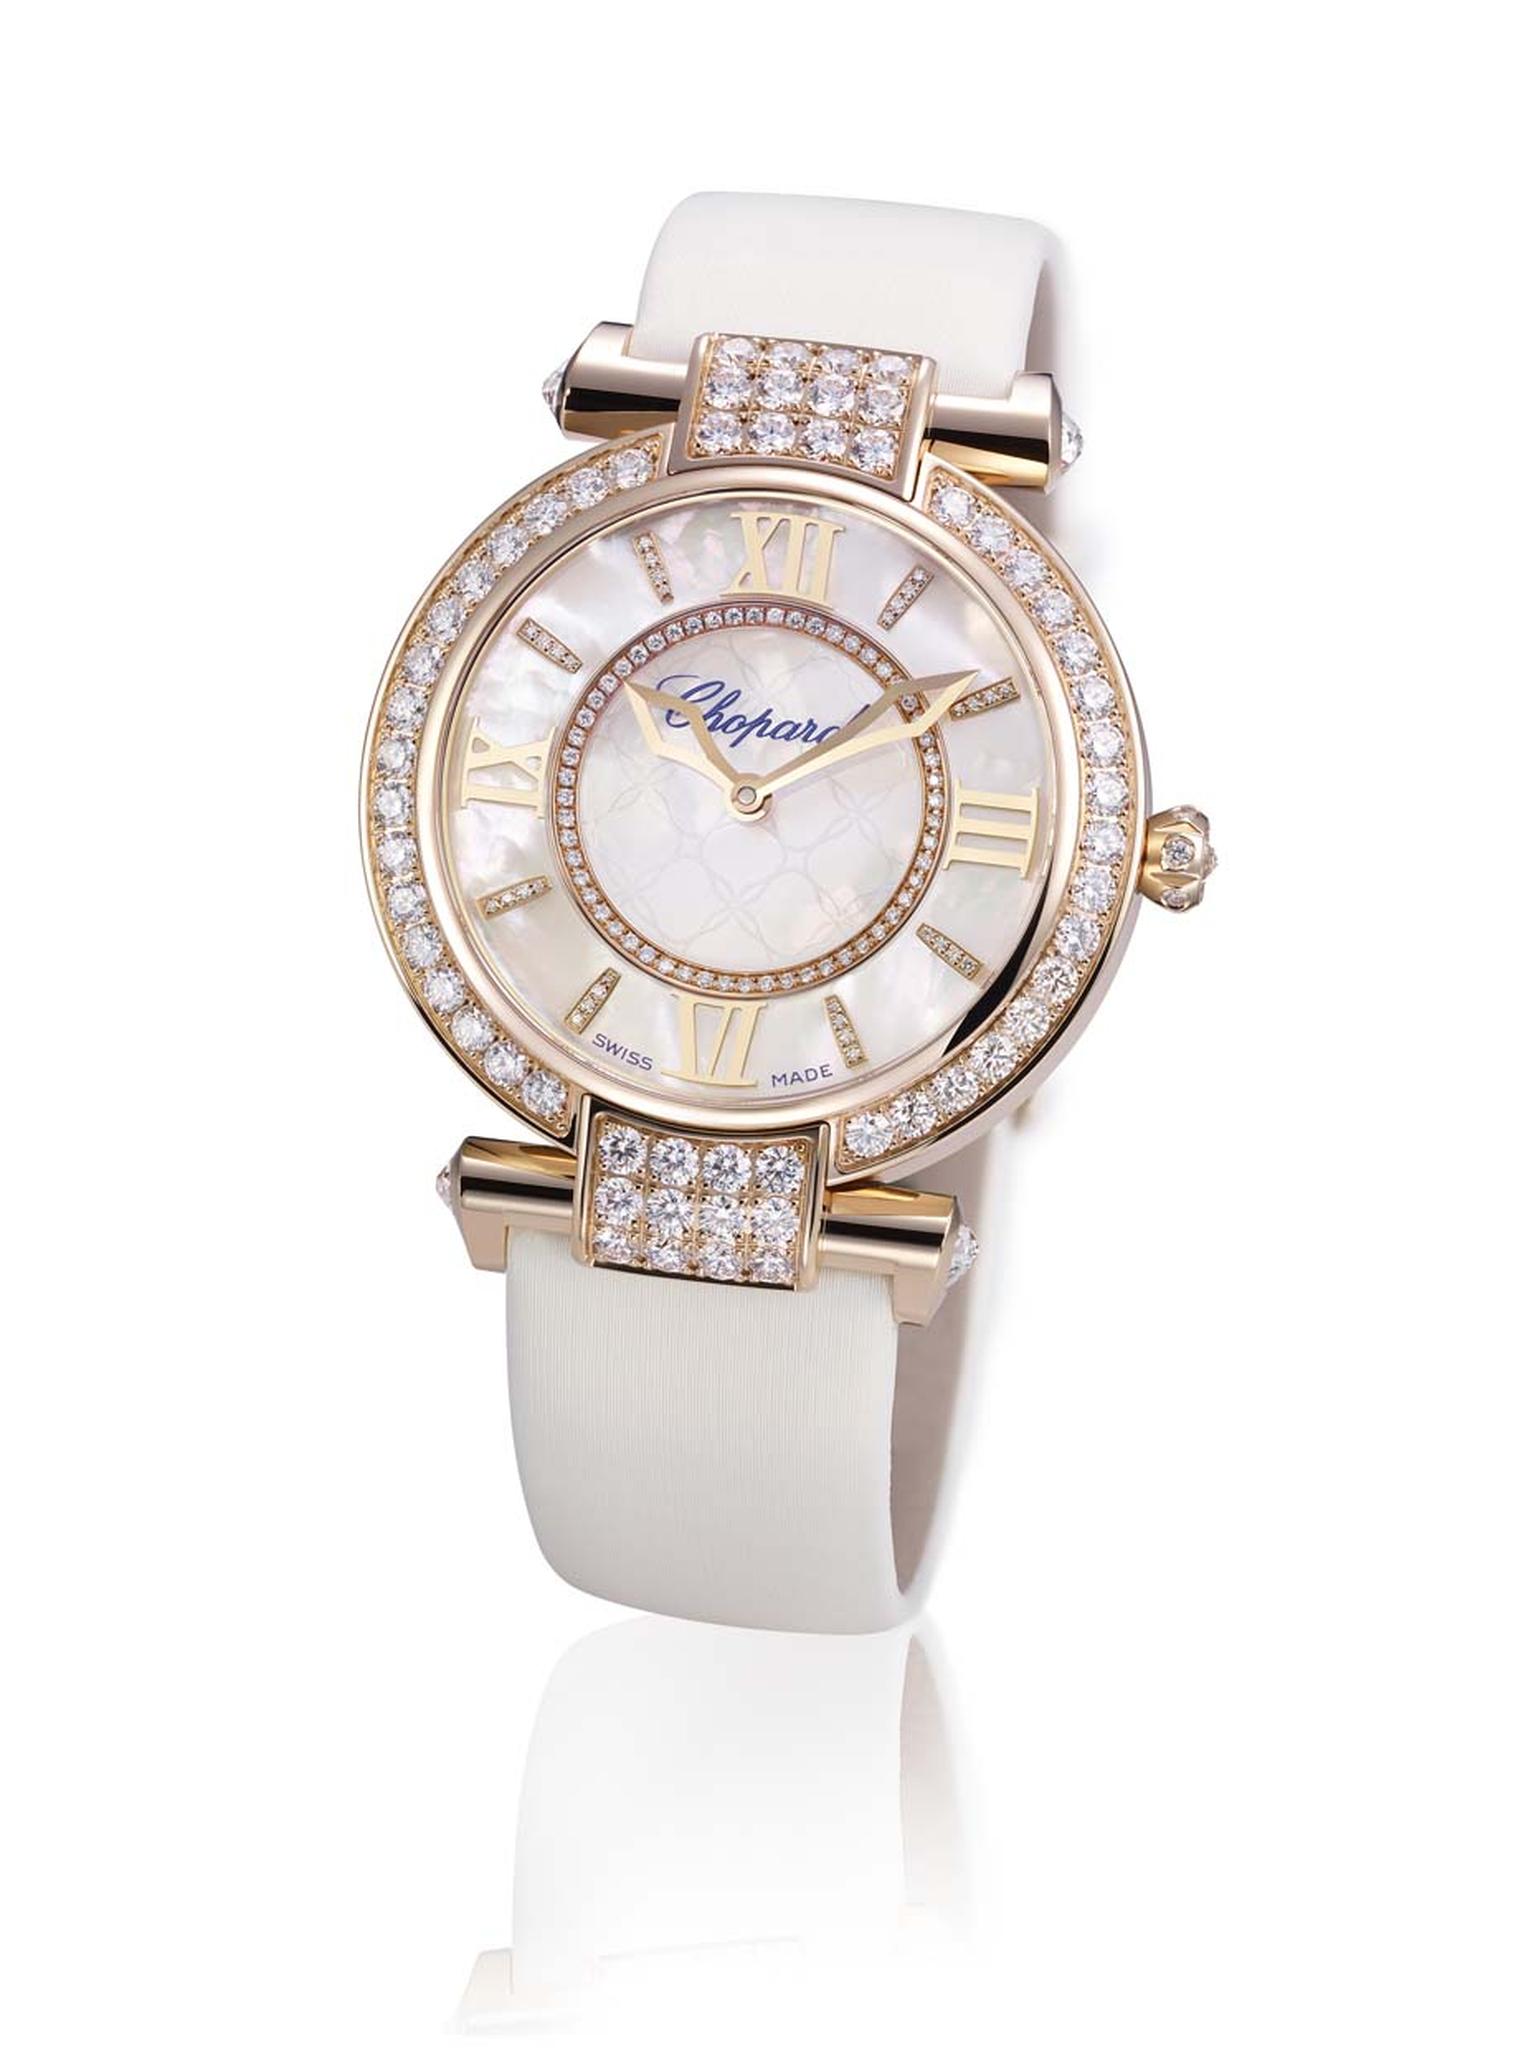 The Chopard Imperiale watch is classical in spirit, with